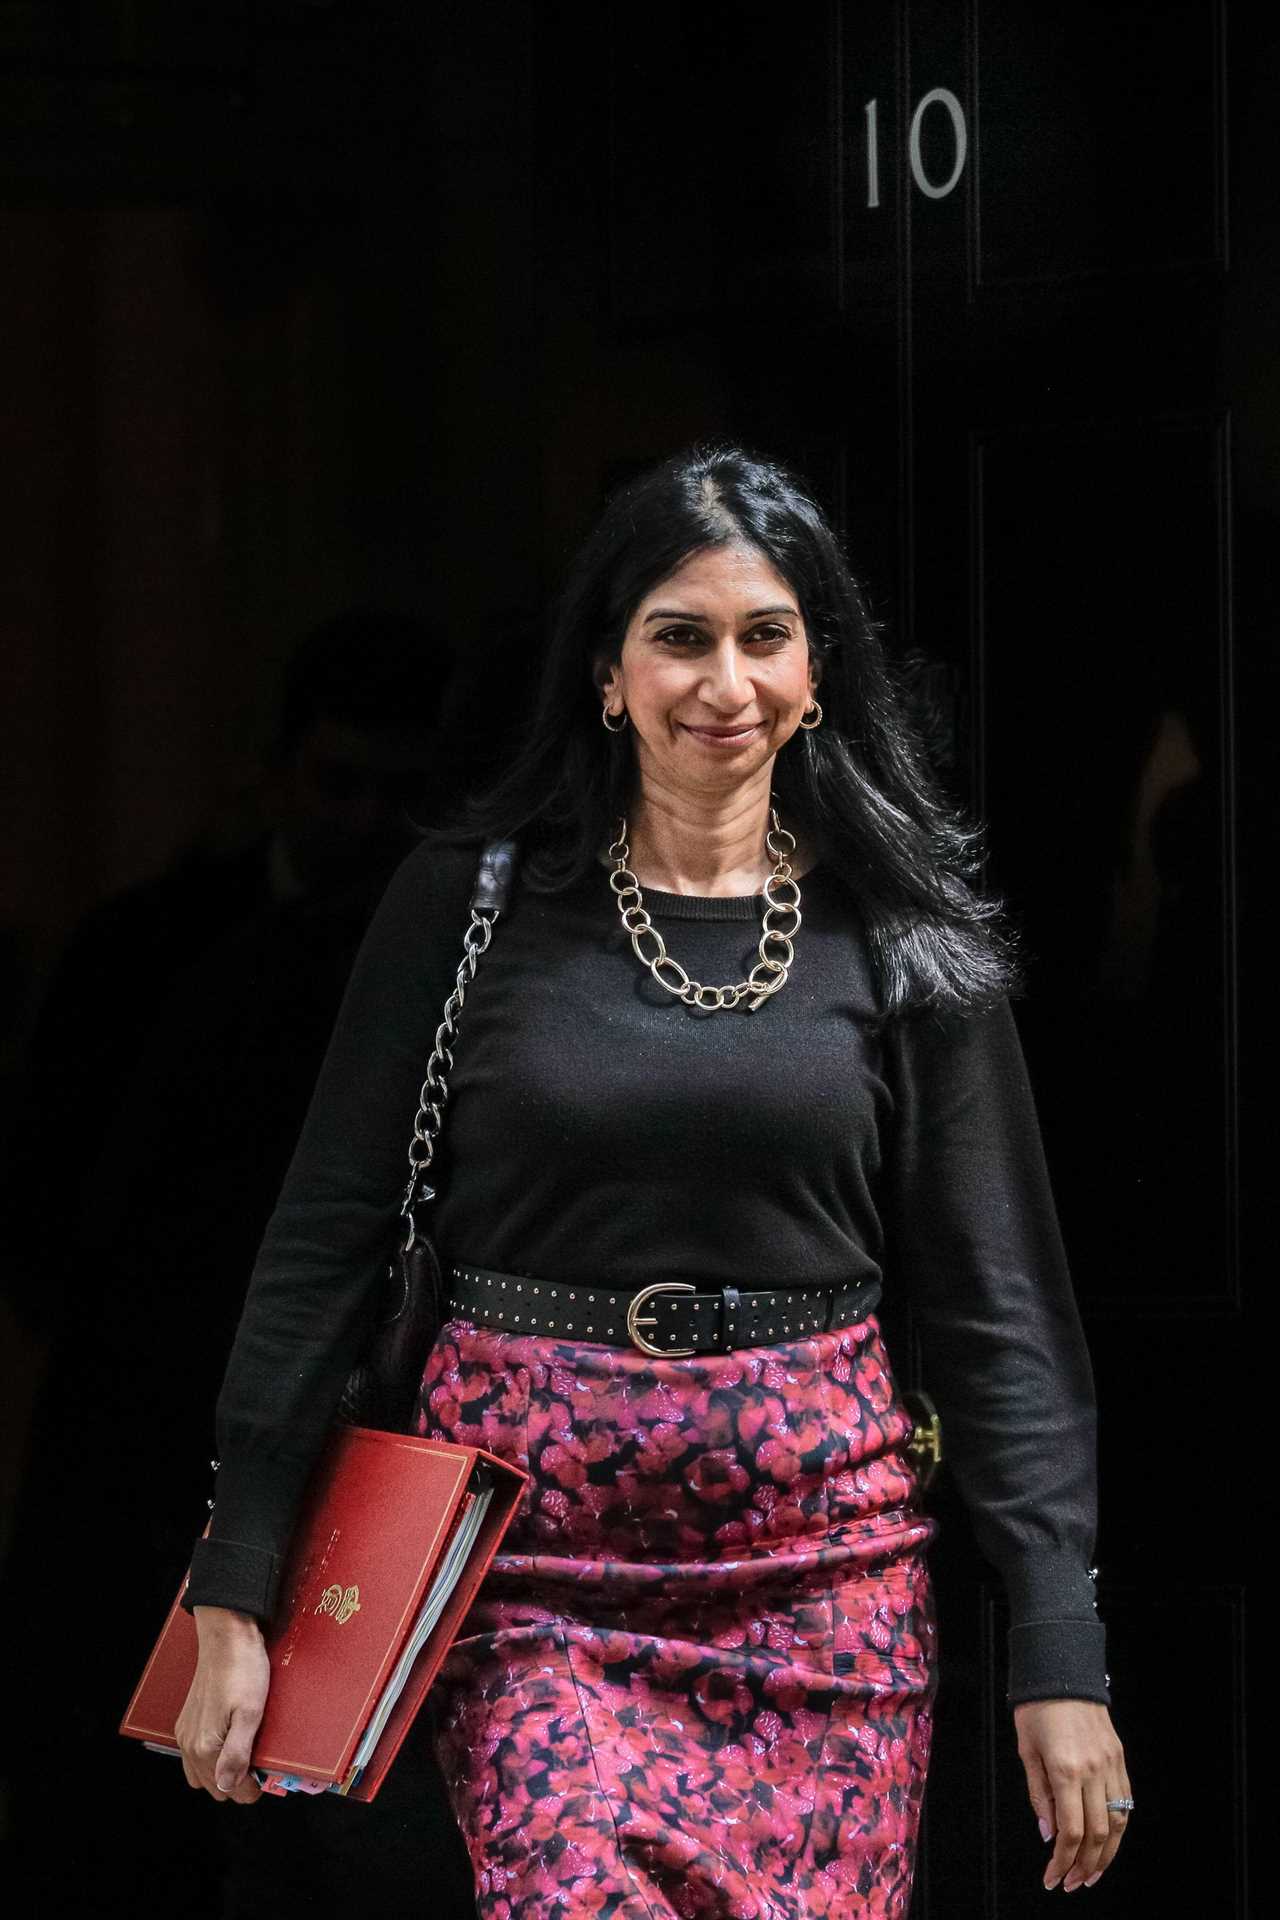 Suella Braverman & Tom Tugendhat at war over Foreign Secretary James Cleverly ‘going soft’ on Iran